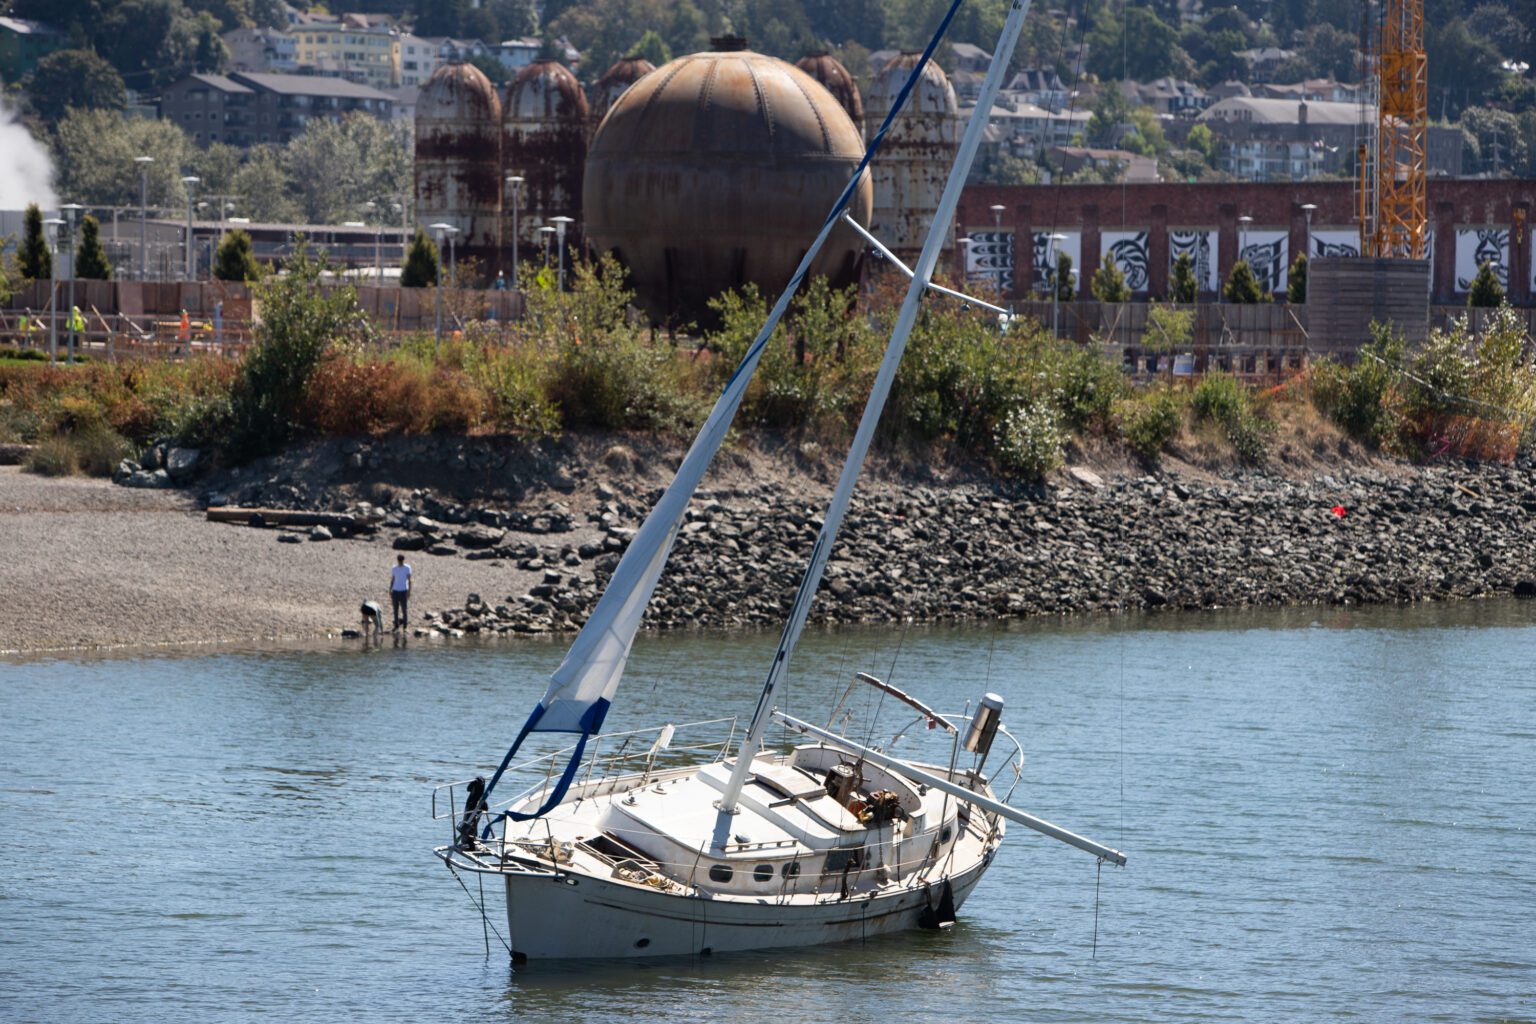 Hands off: Best to leave that grounded sailboat to rot in place